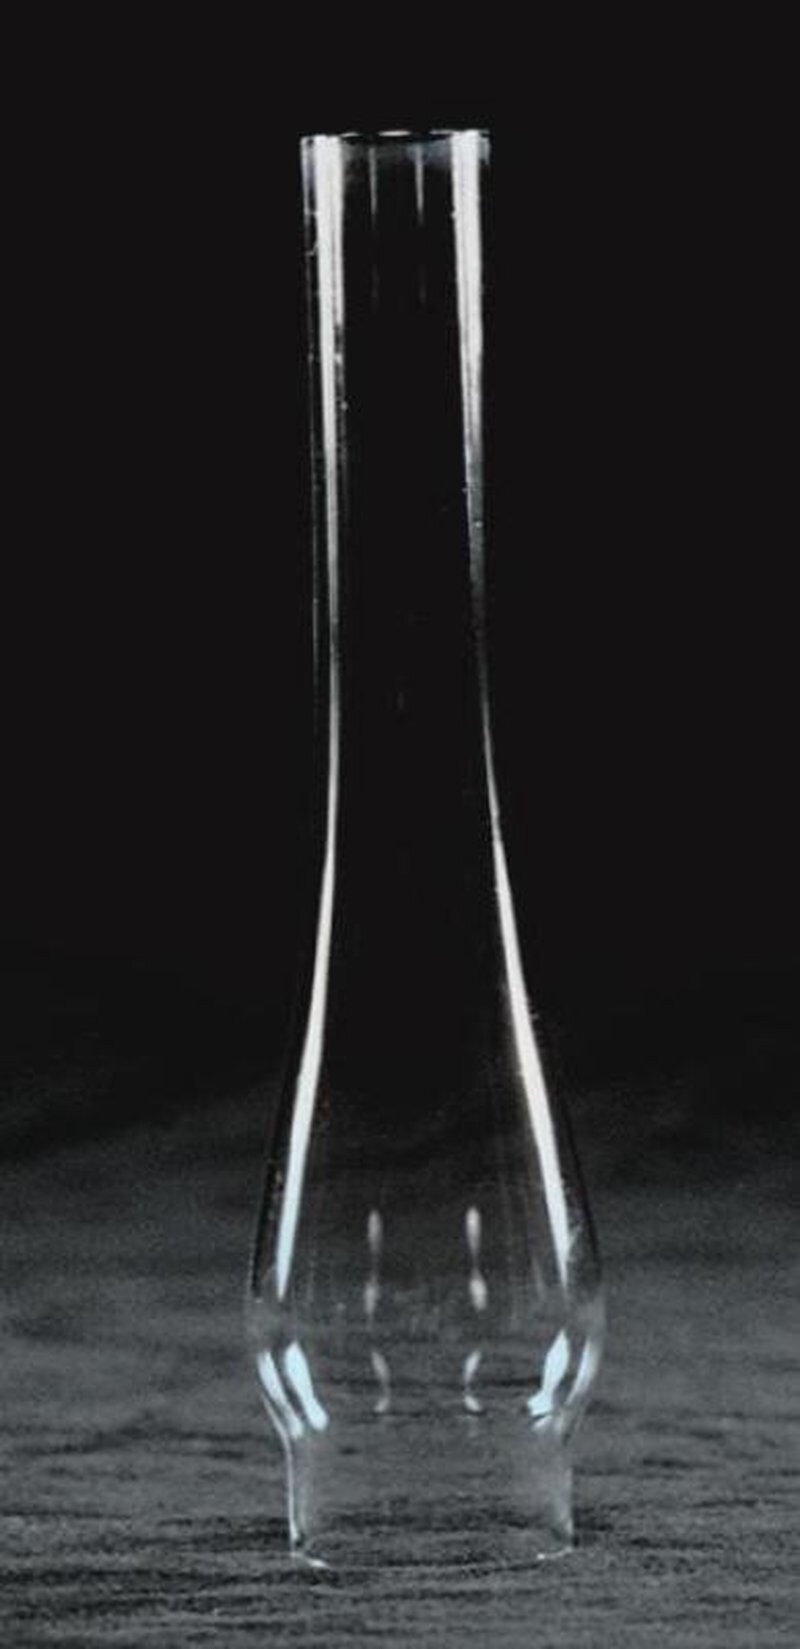 Clear Glass Lamp Chimney, Replacement Hurricane Globe Measures 1 1/8 Inch Diameter Base x 5 1/2 Inches High for Oil or Kerosene Lanterns